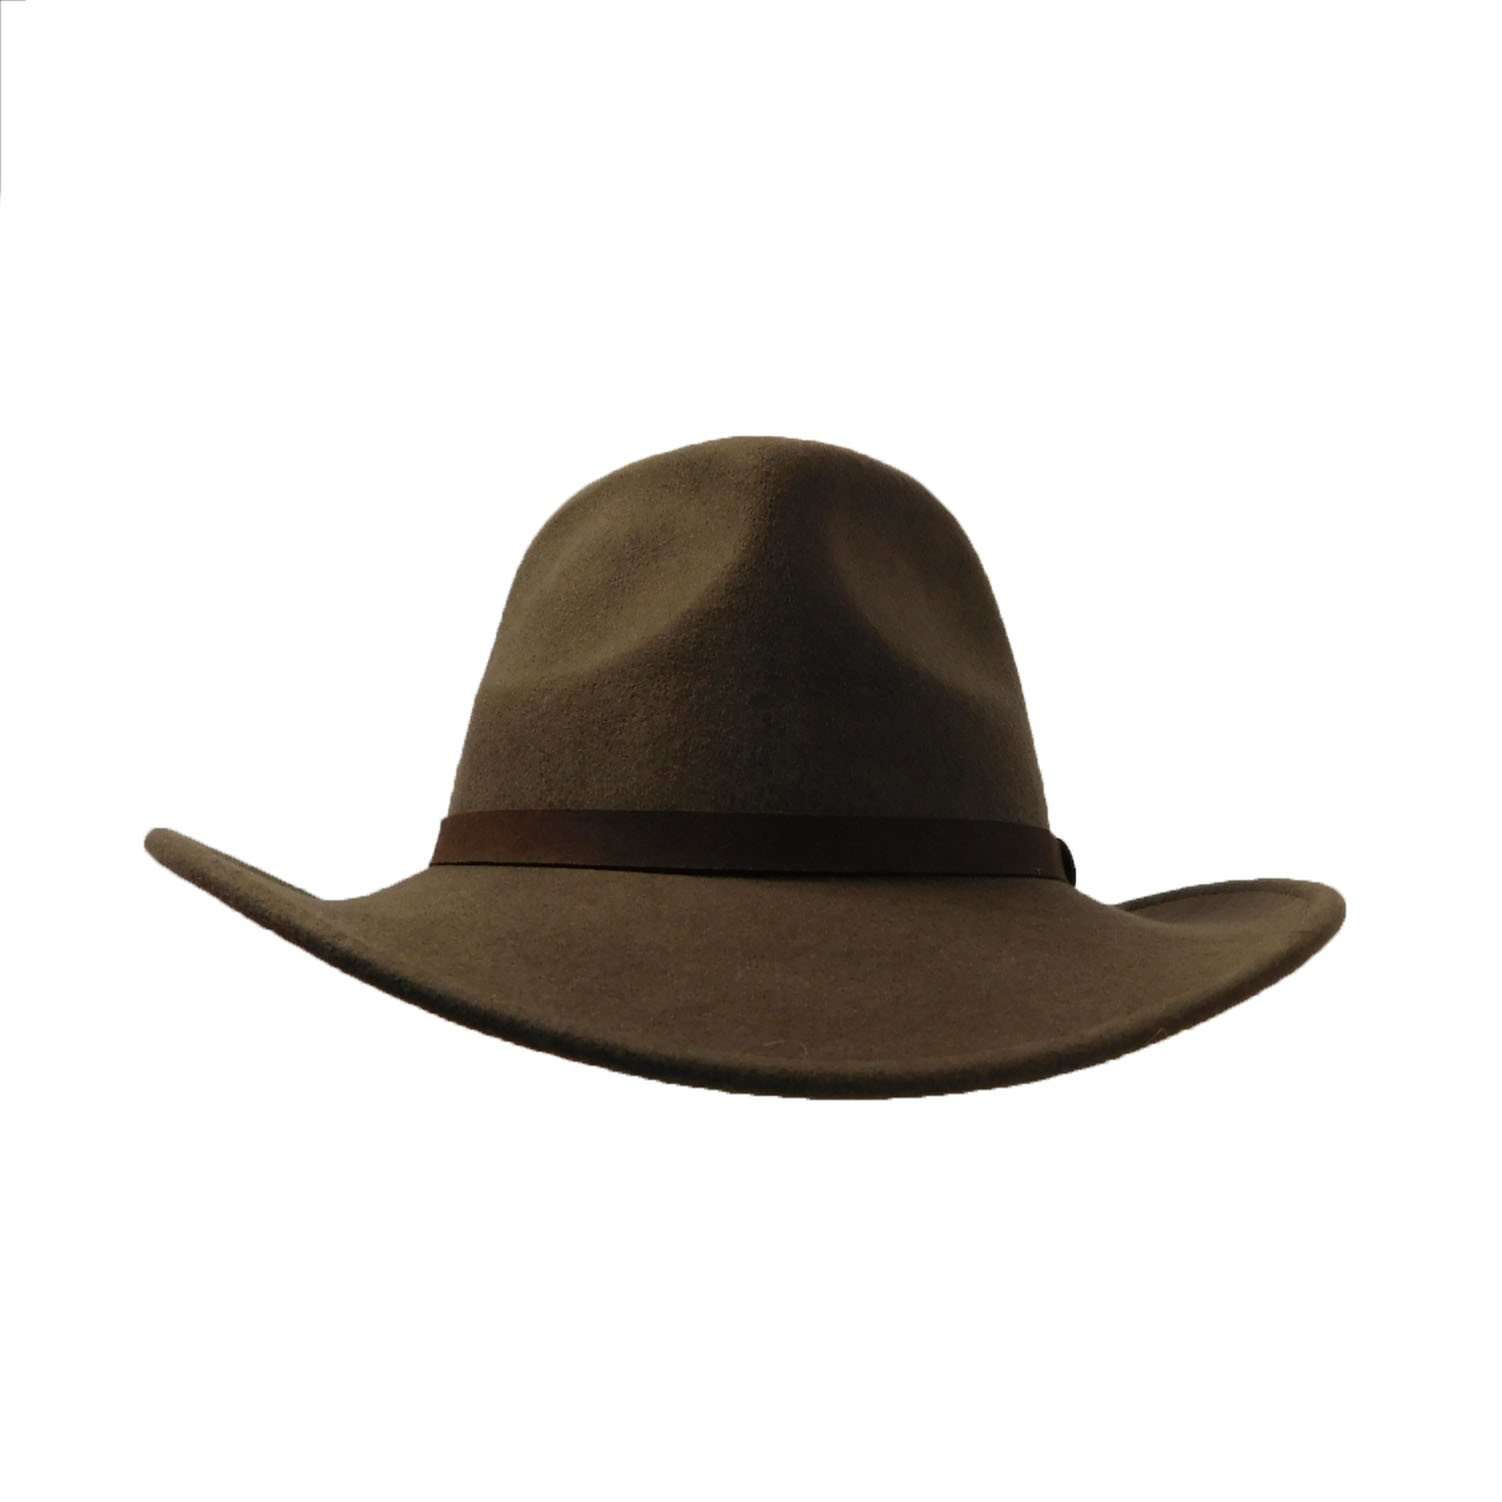 Wool Felt Outback with Leather Band Safari Hat Dorfman Hat Co. MWWF966CMS Camel S 